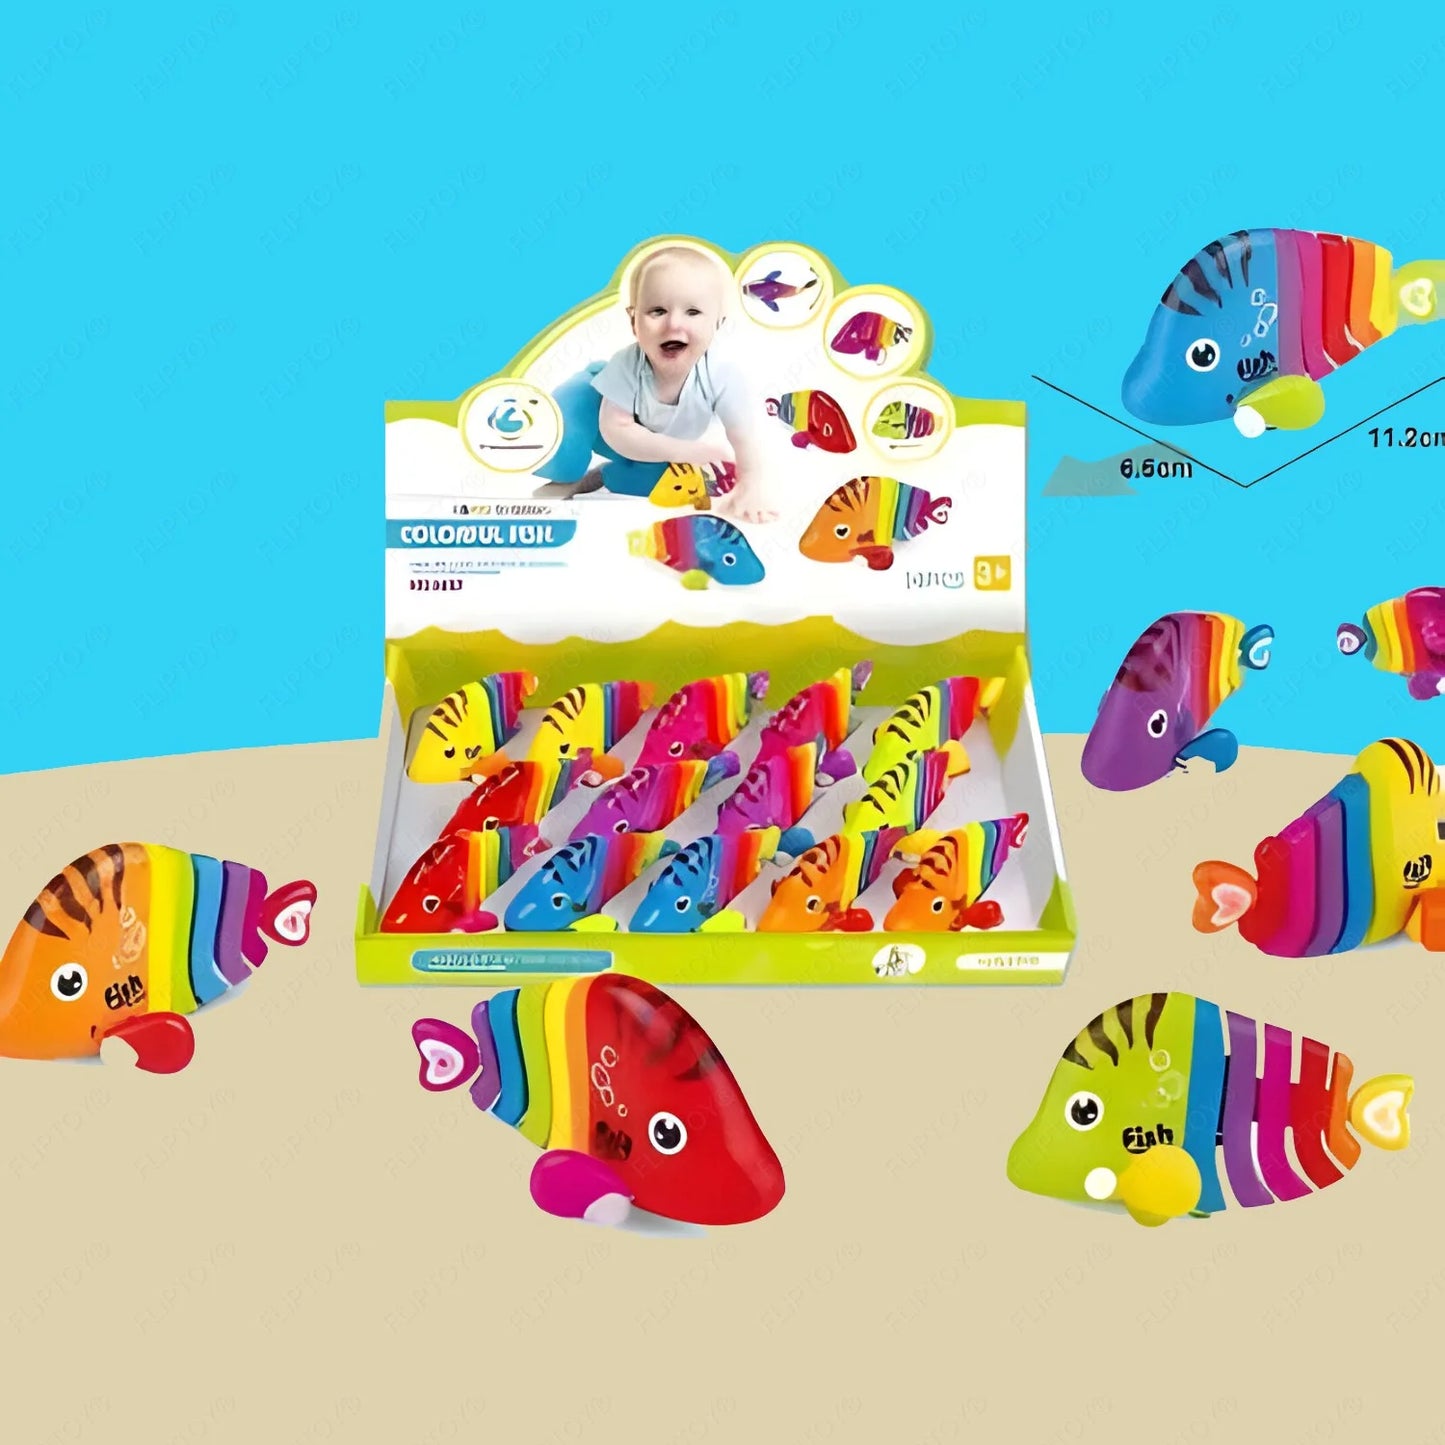 Cute Jumping Fish Toy | Toy for Kids & Adults | Crawling Fish Toys for Birthday Gift - Multicolour ( Pack of 1 )